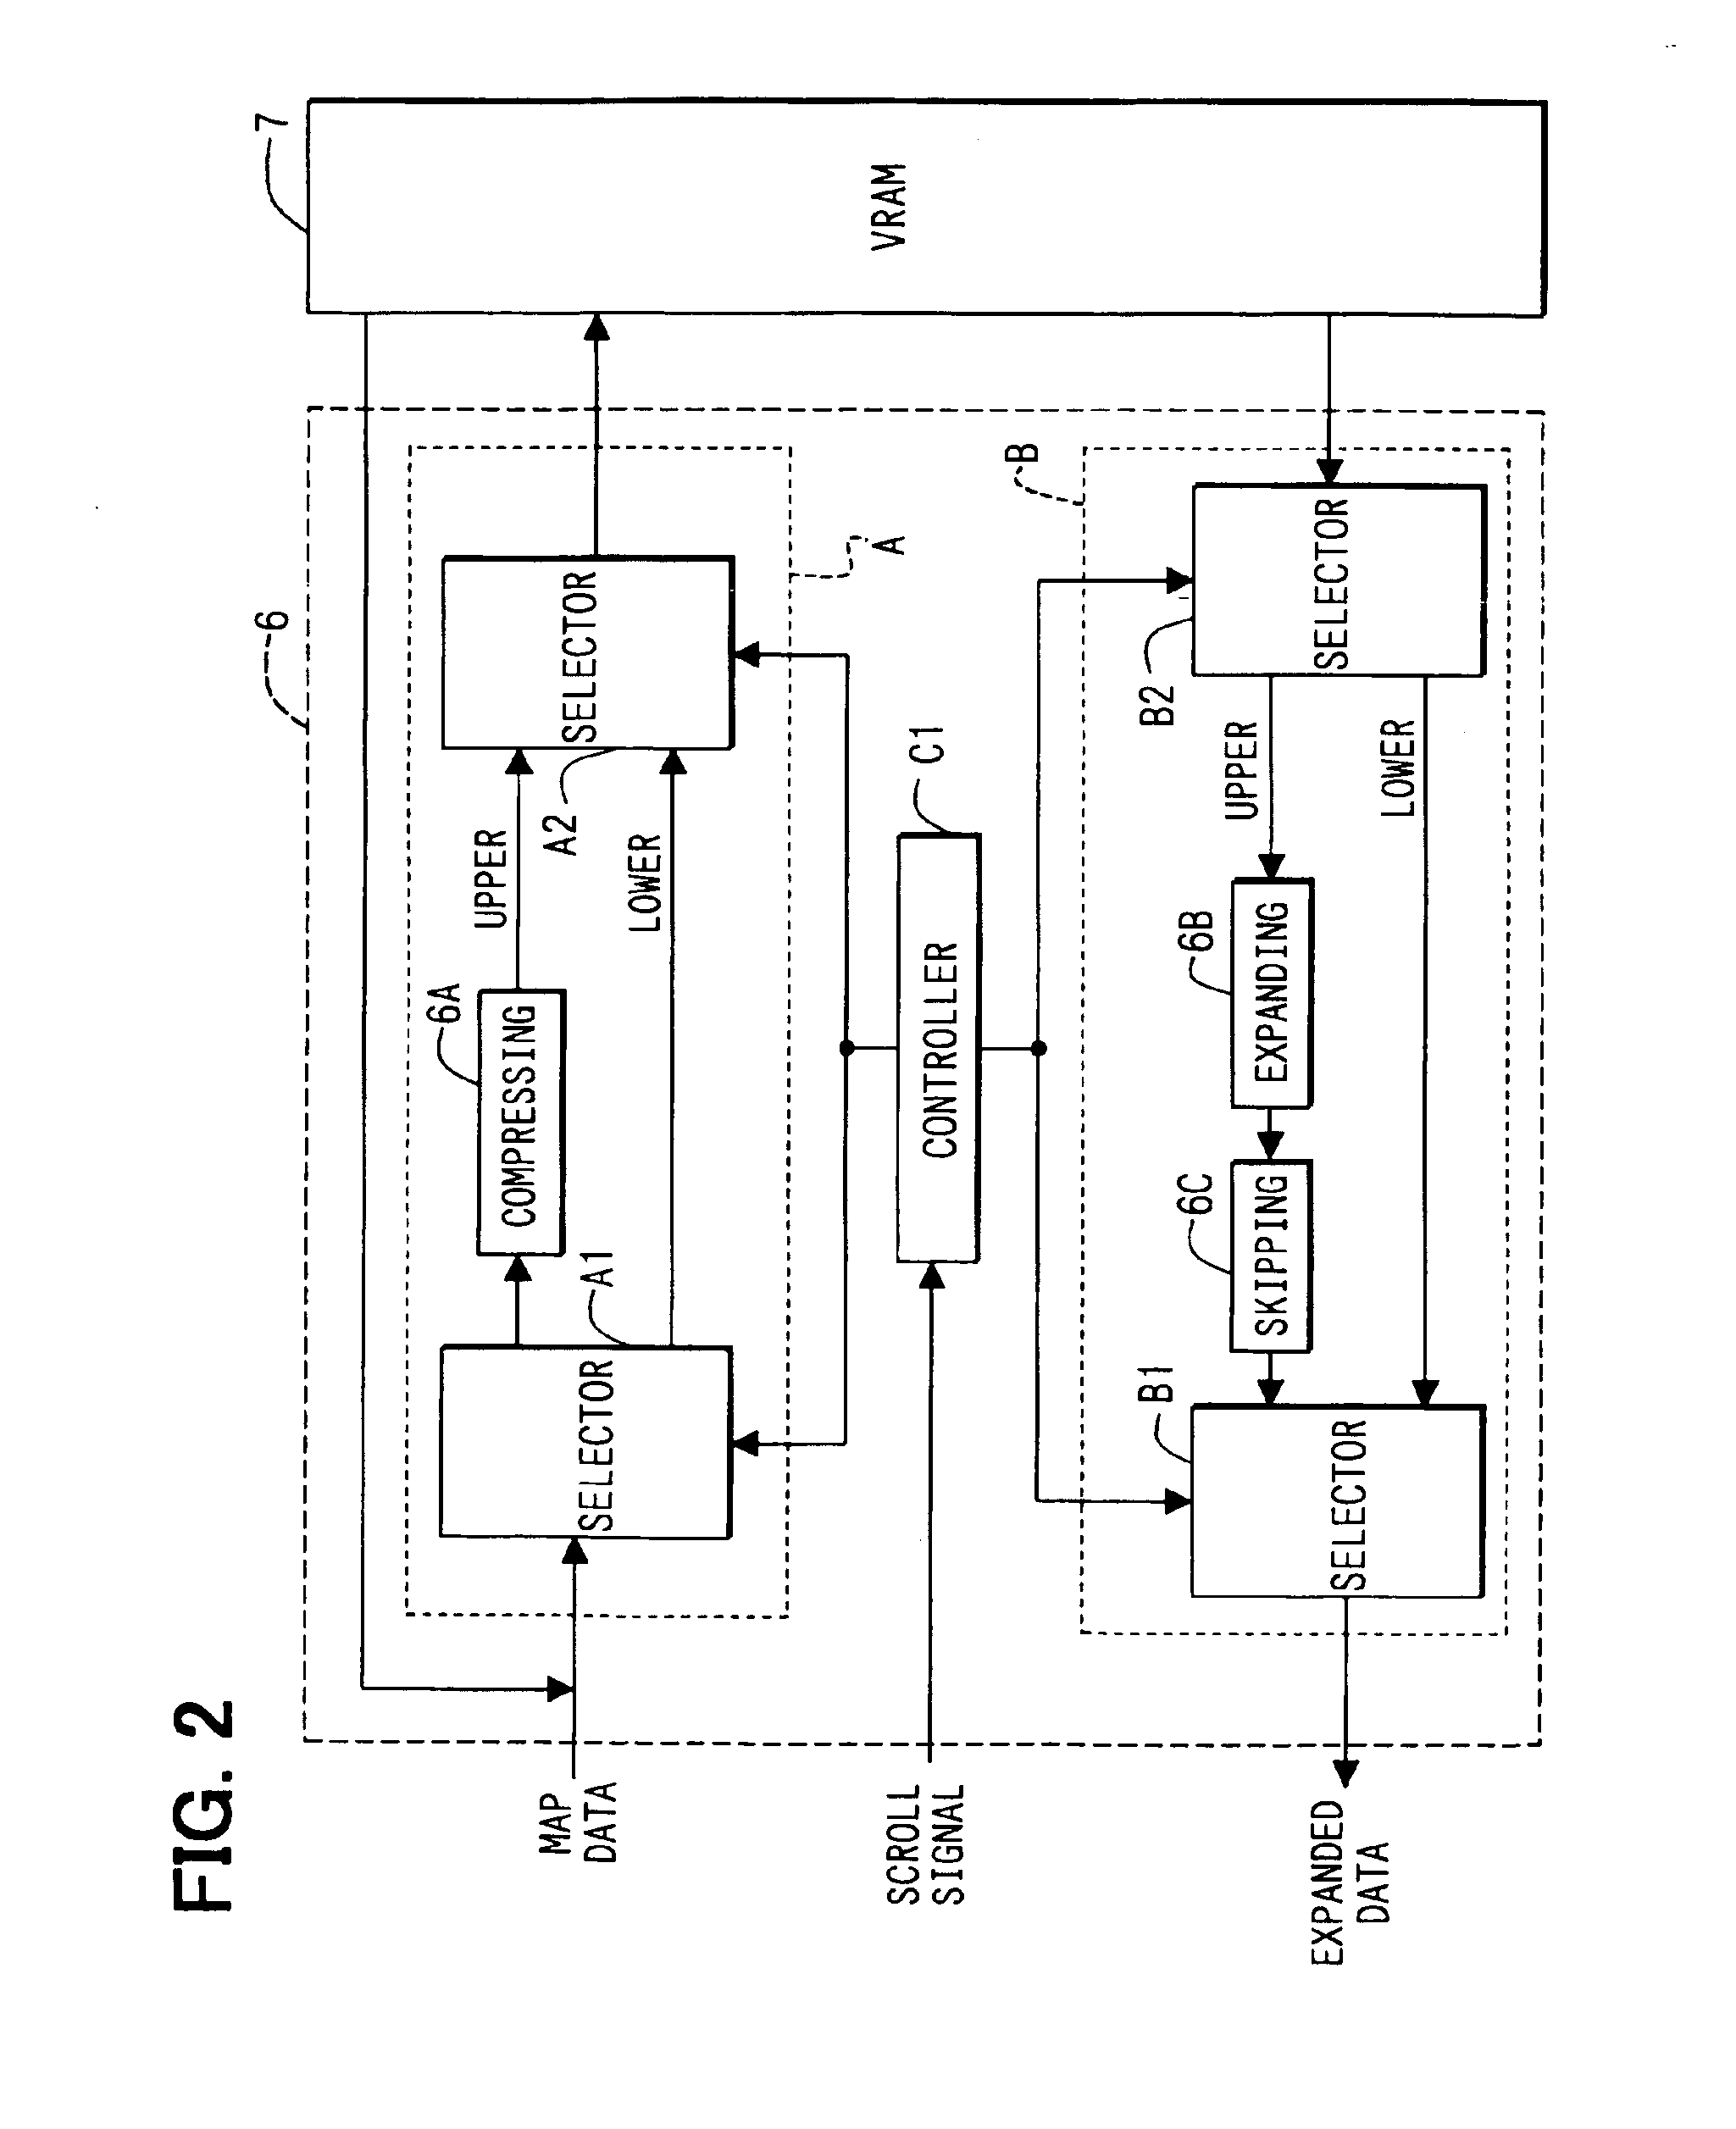 Image display system scrolling image at high speed using data compression